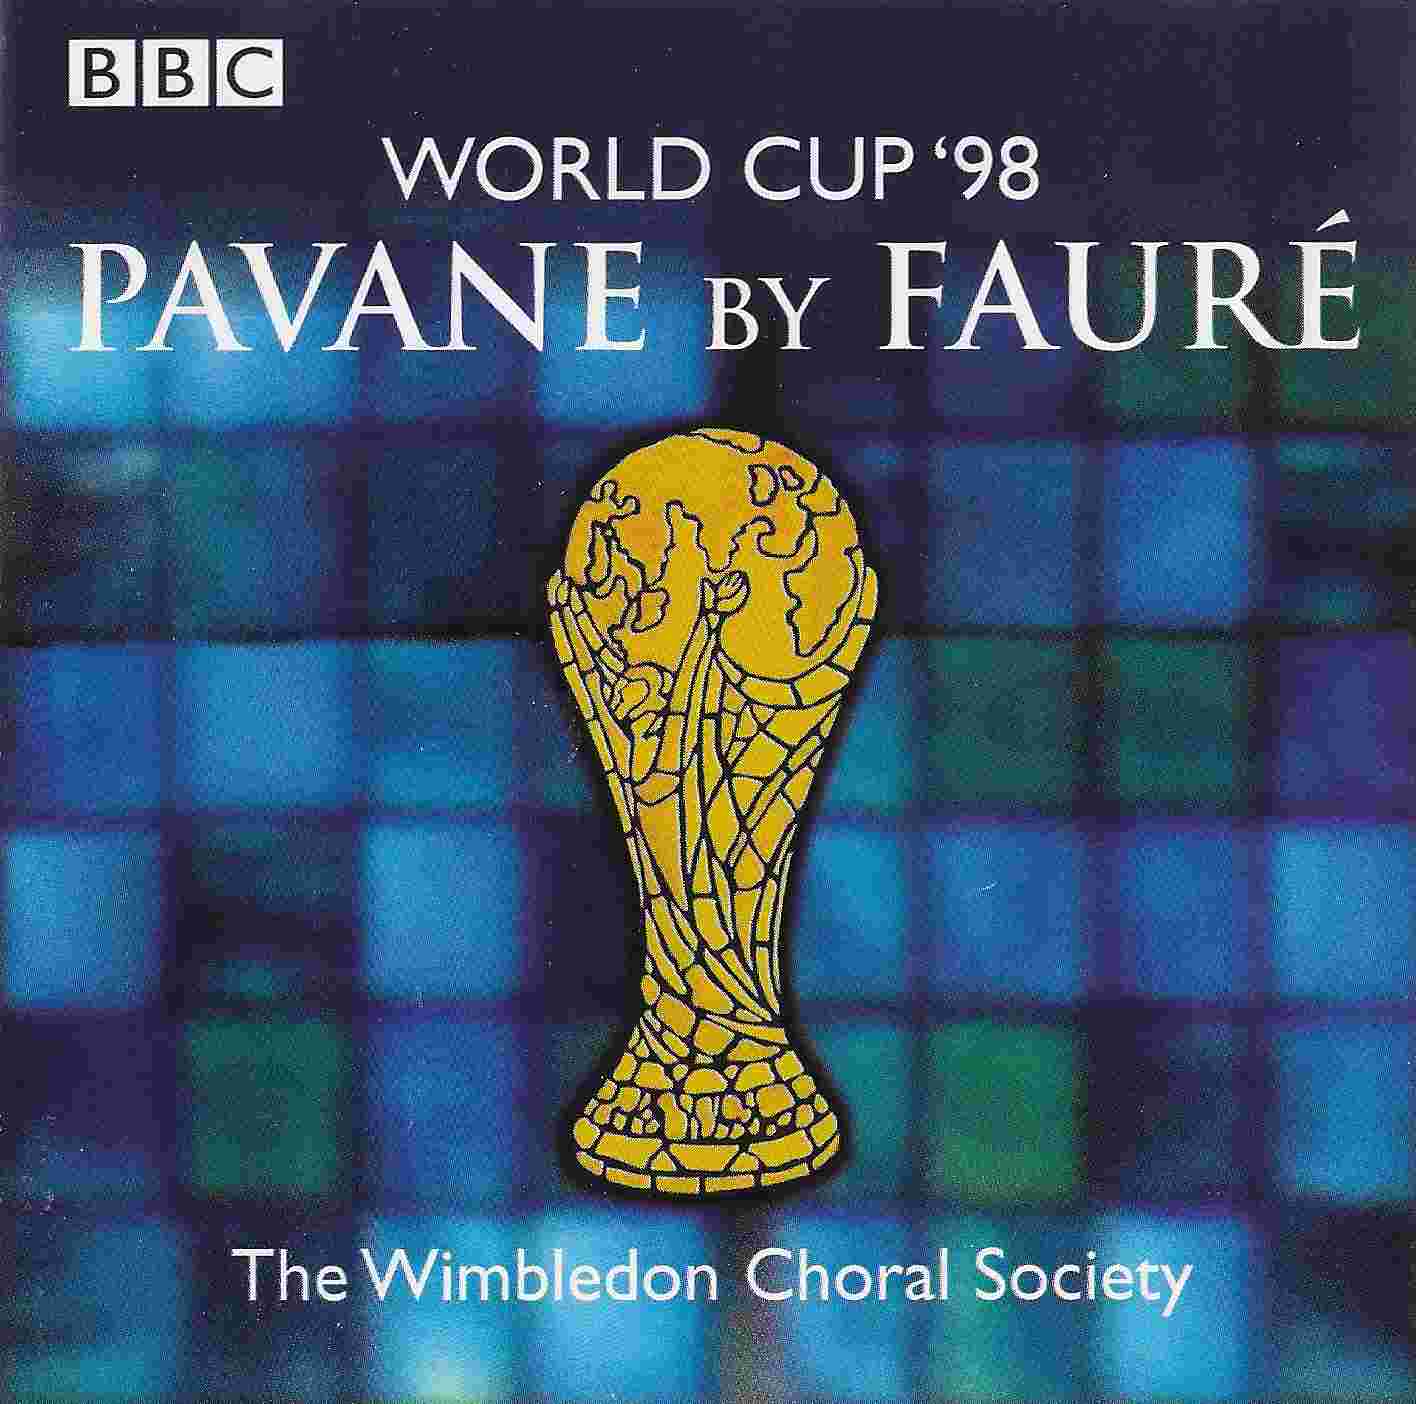 Picture of CDSTAS 2979 Pavane (World Cup '98) by artist Gabriel Faure / Arr. Elizabeth Parker / The Wimbledon Choral Society from the BBC cdsingles - Records and Tapes library